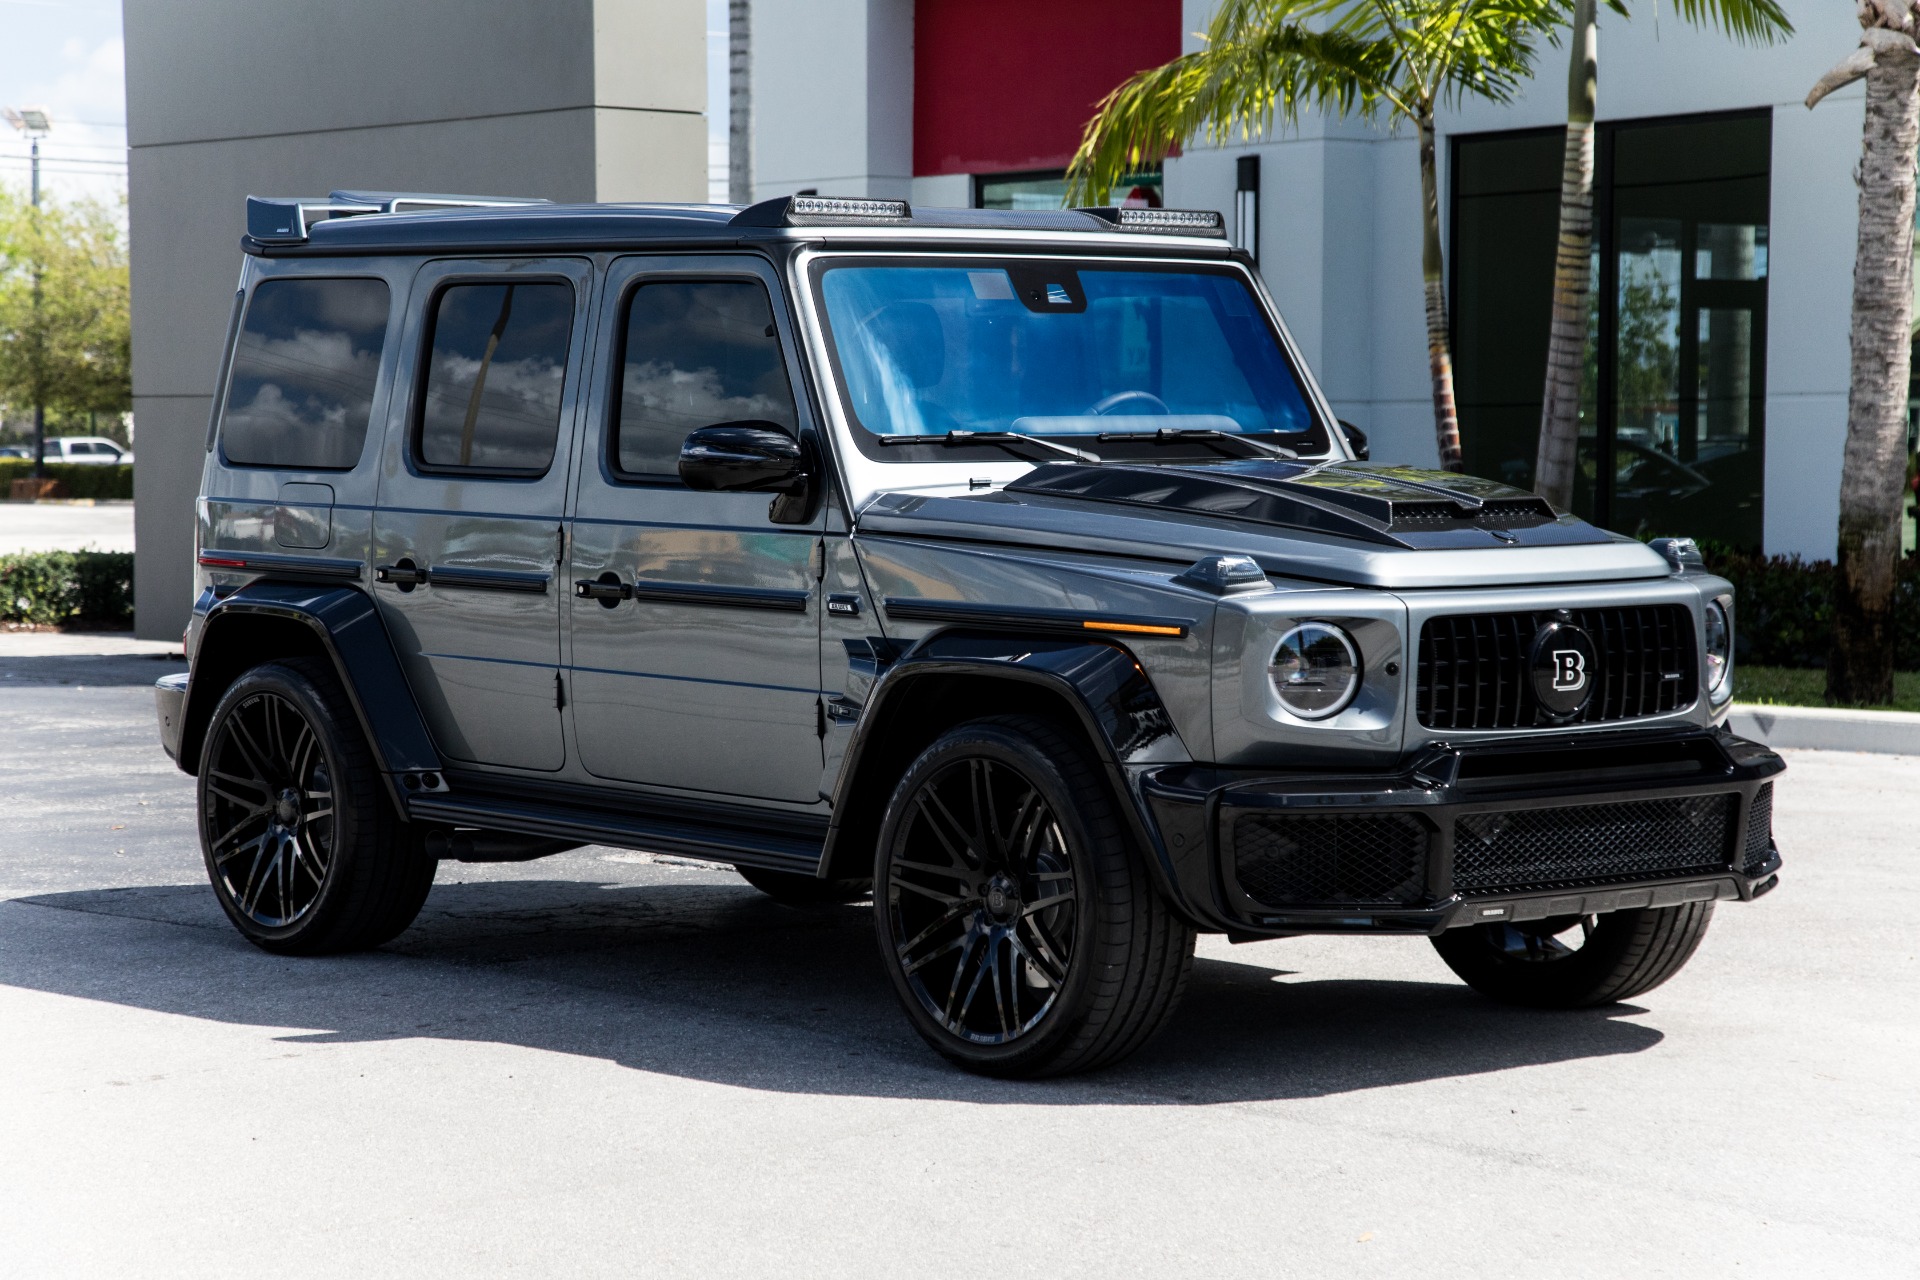 Used 2019 Mercedes Benz G Class Amg G 63 Brabus For Sale 249 900 Marino Performance Motors Stock 323158